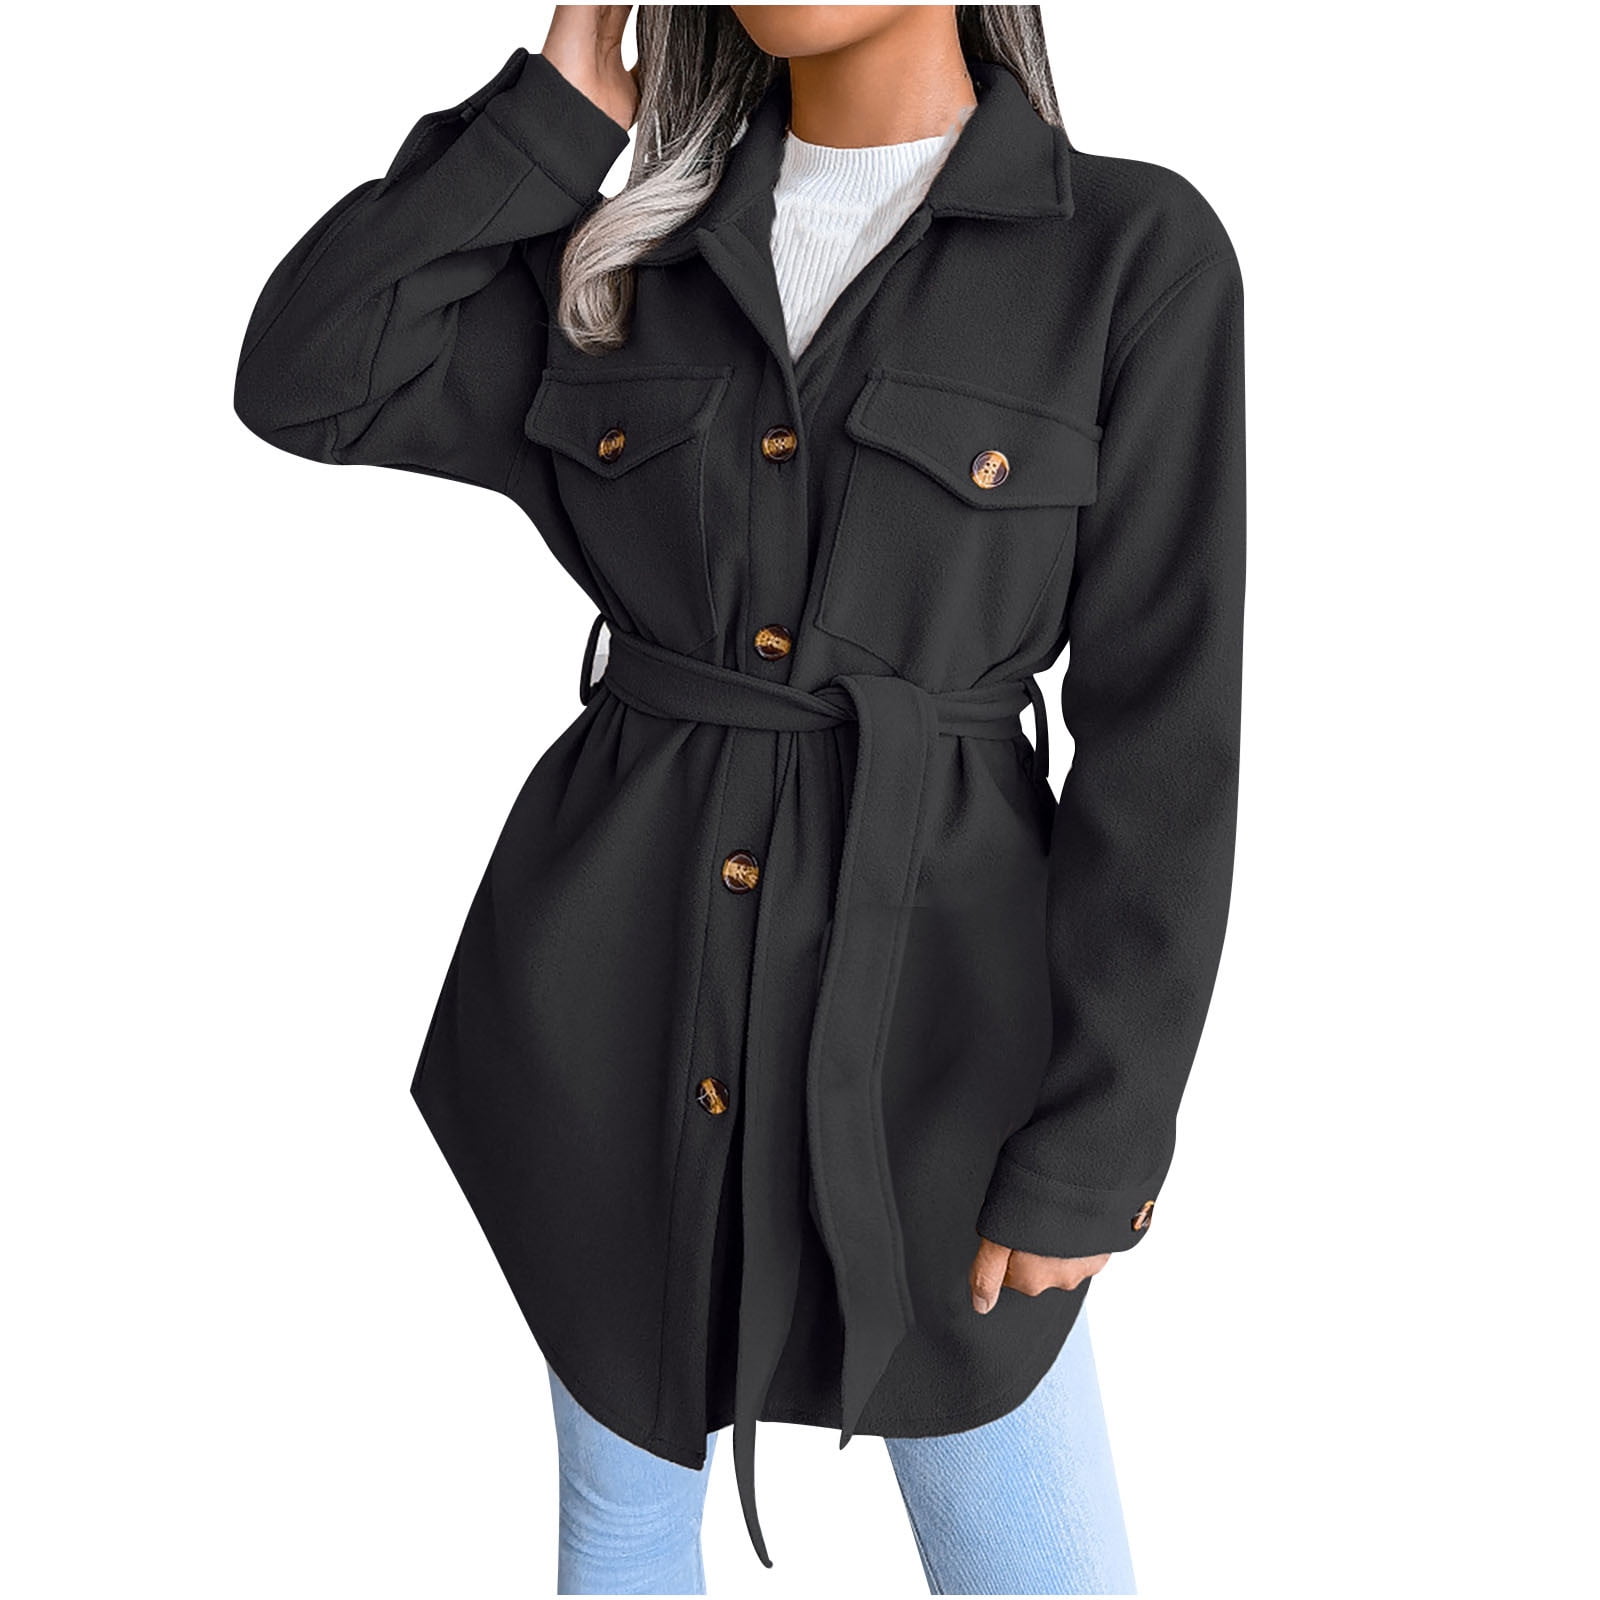 AIEOTT Winter Coats for Women, Plus Size Double Breasted Pea Coat ...